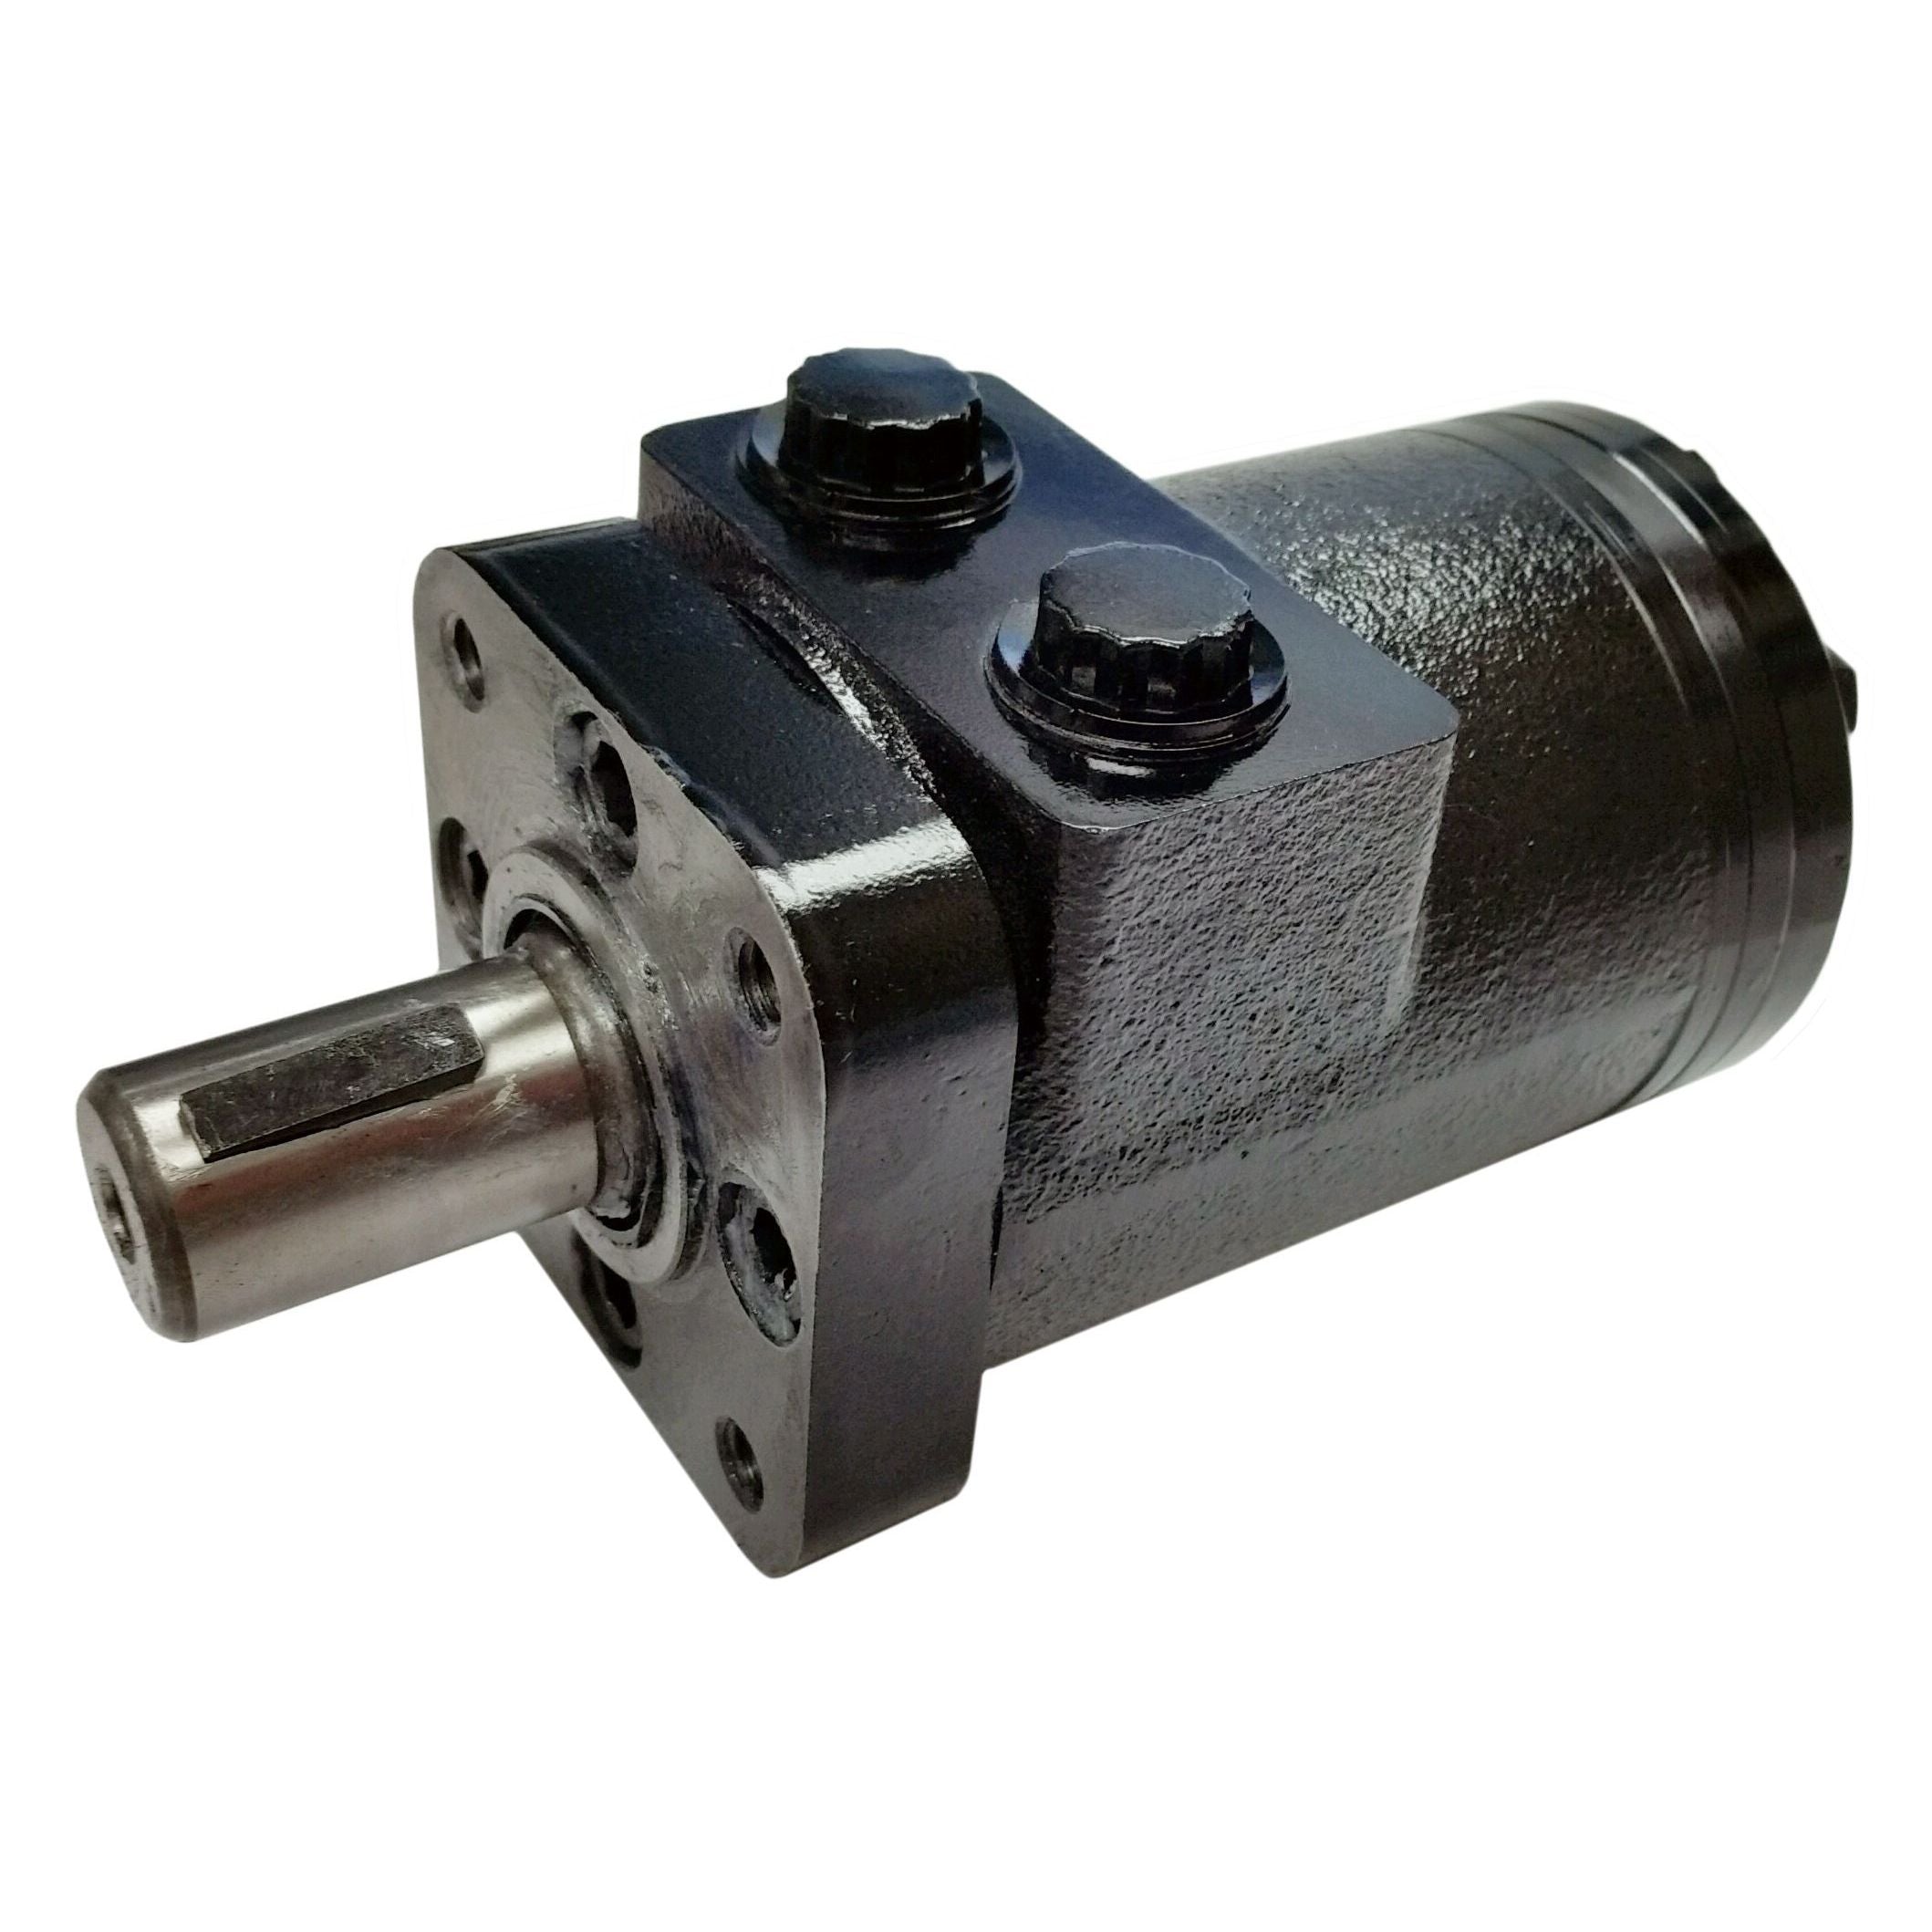 BMPH-200-H4-K-F : Dynamic LSHT Motor, 195cc, 310RPM, 3186in-lb, 2031psi Differential, 15.85GPM, SAE A 4-Bolt Mount, 1" Bore x 1/4" Key Shaft, Side Ported, Manifold